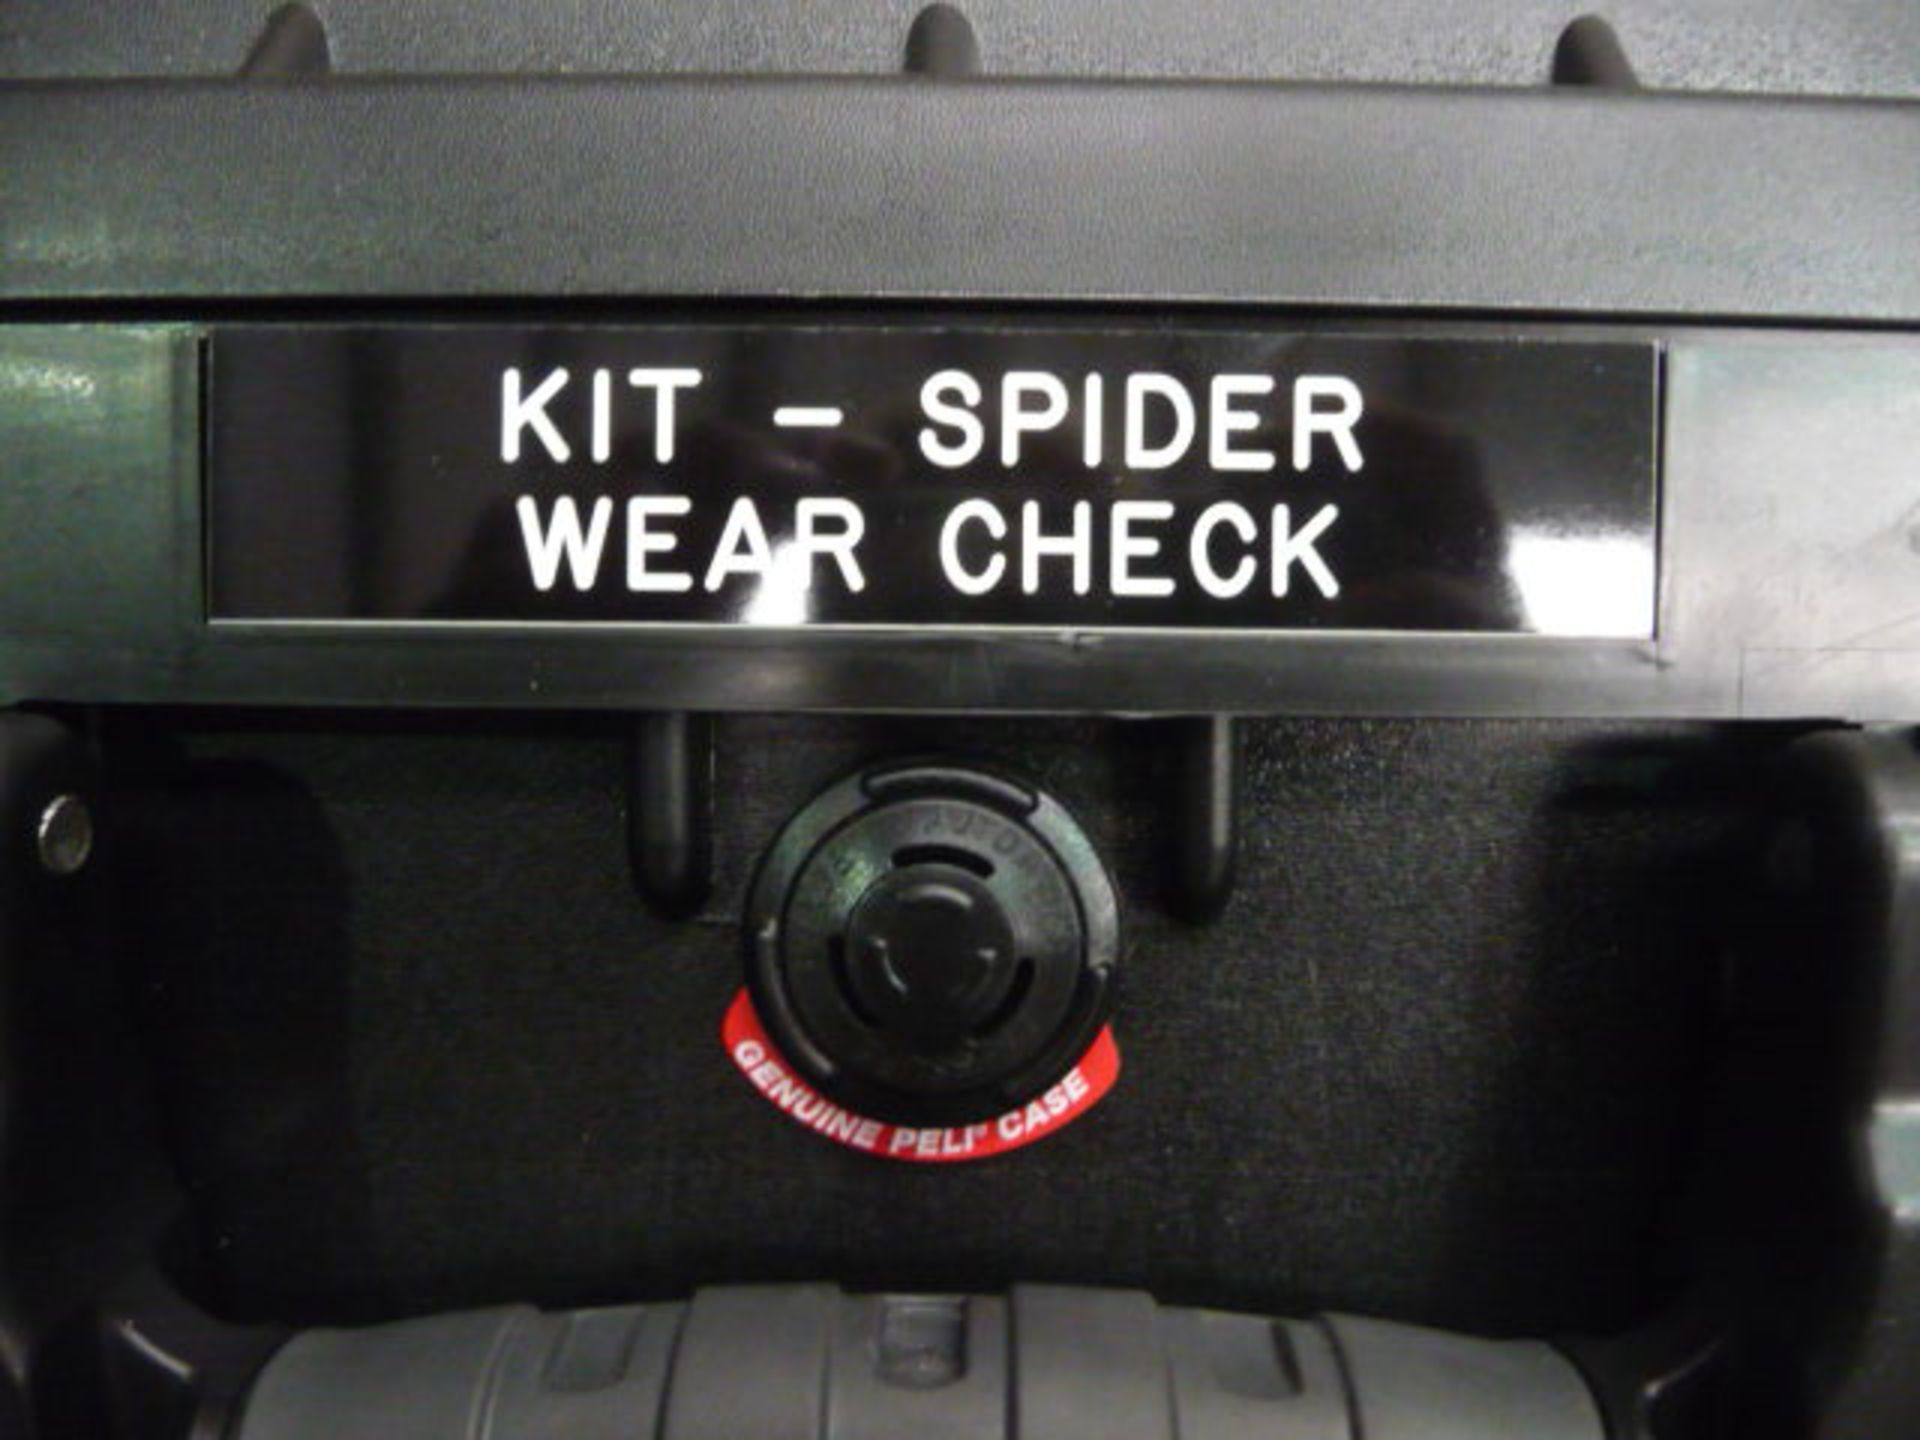 Heavy Duty Peli Case 1450 containing a Spider Wear Check Kit - Image 3 of 7